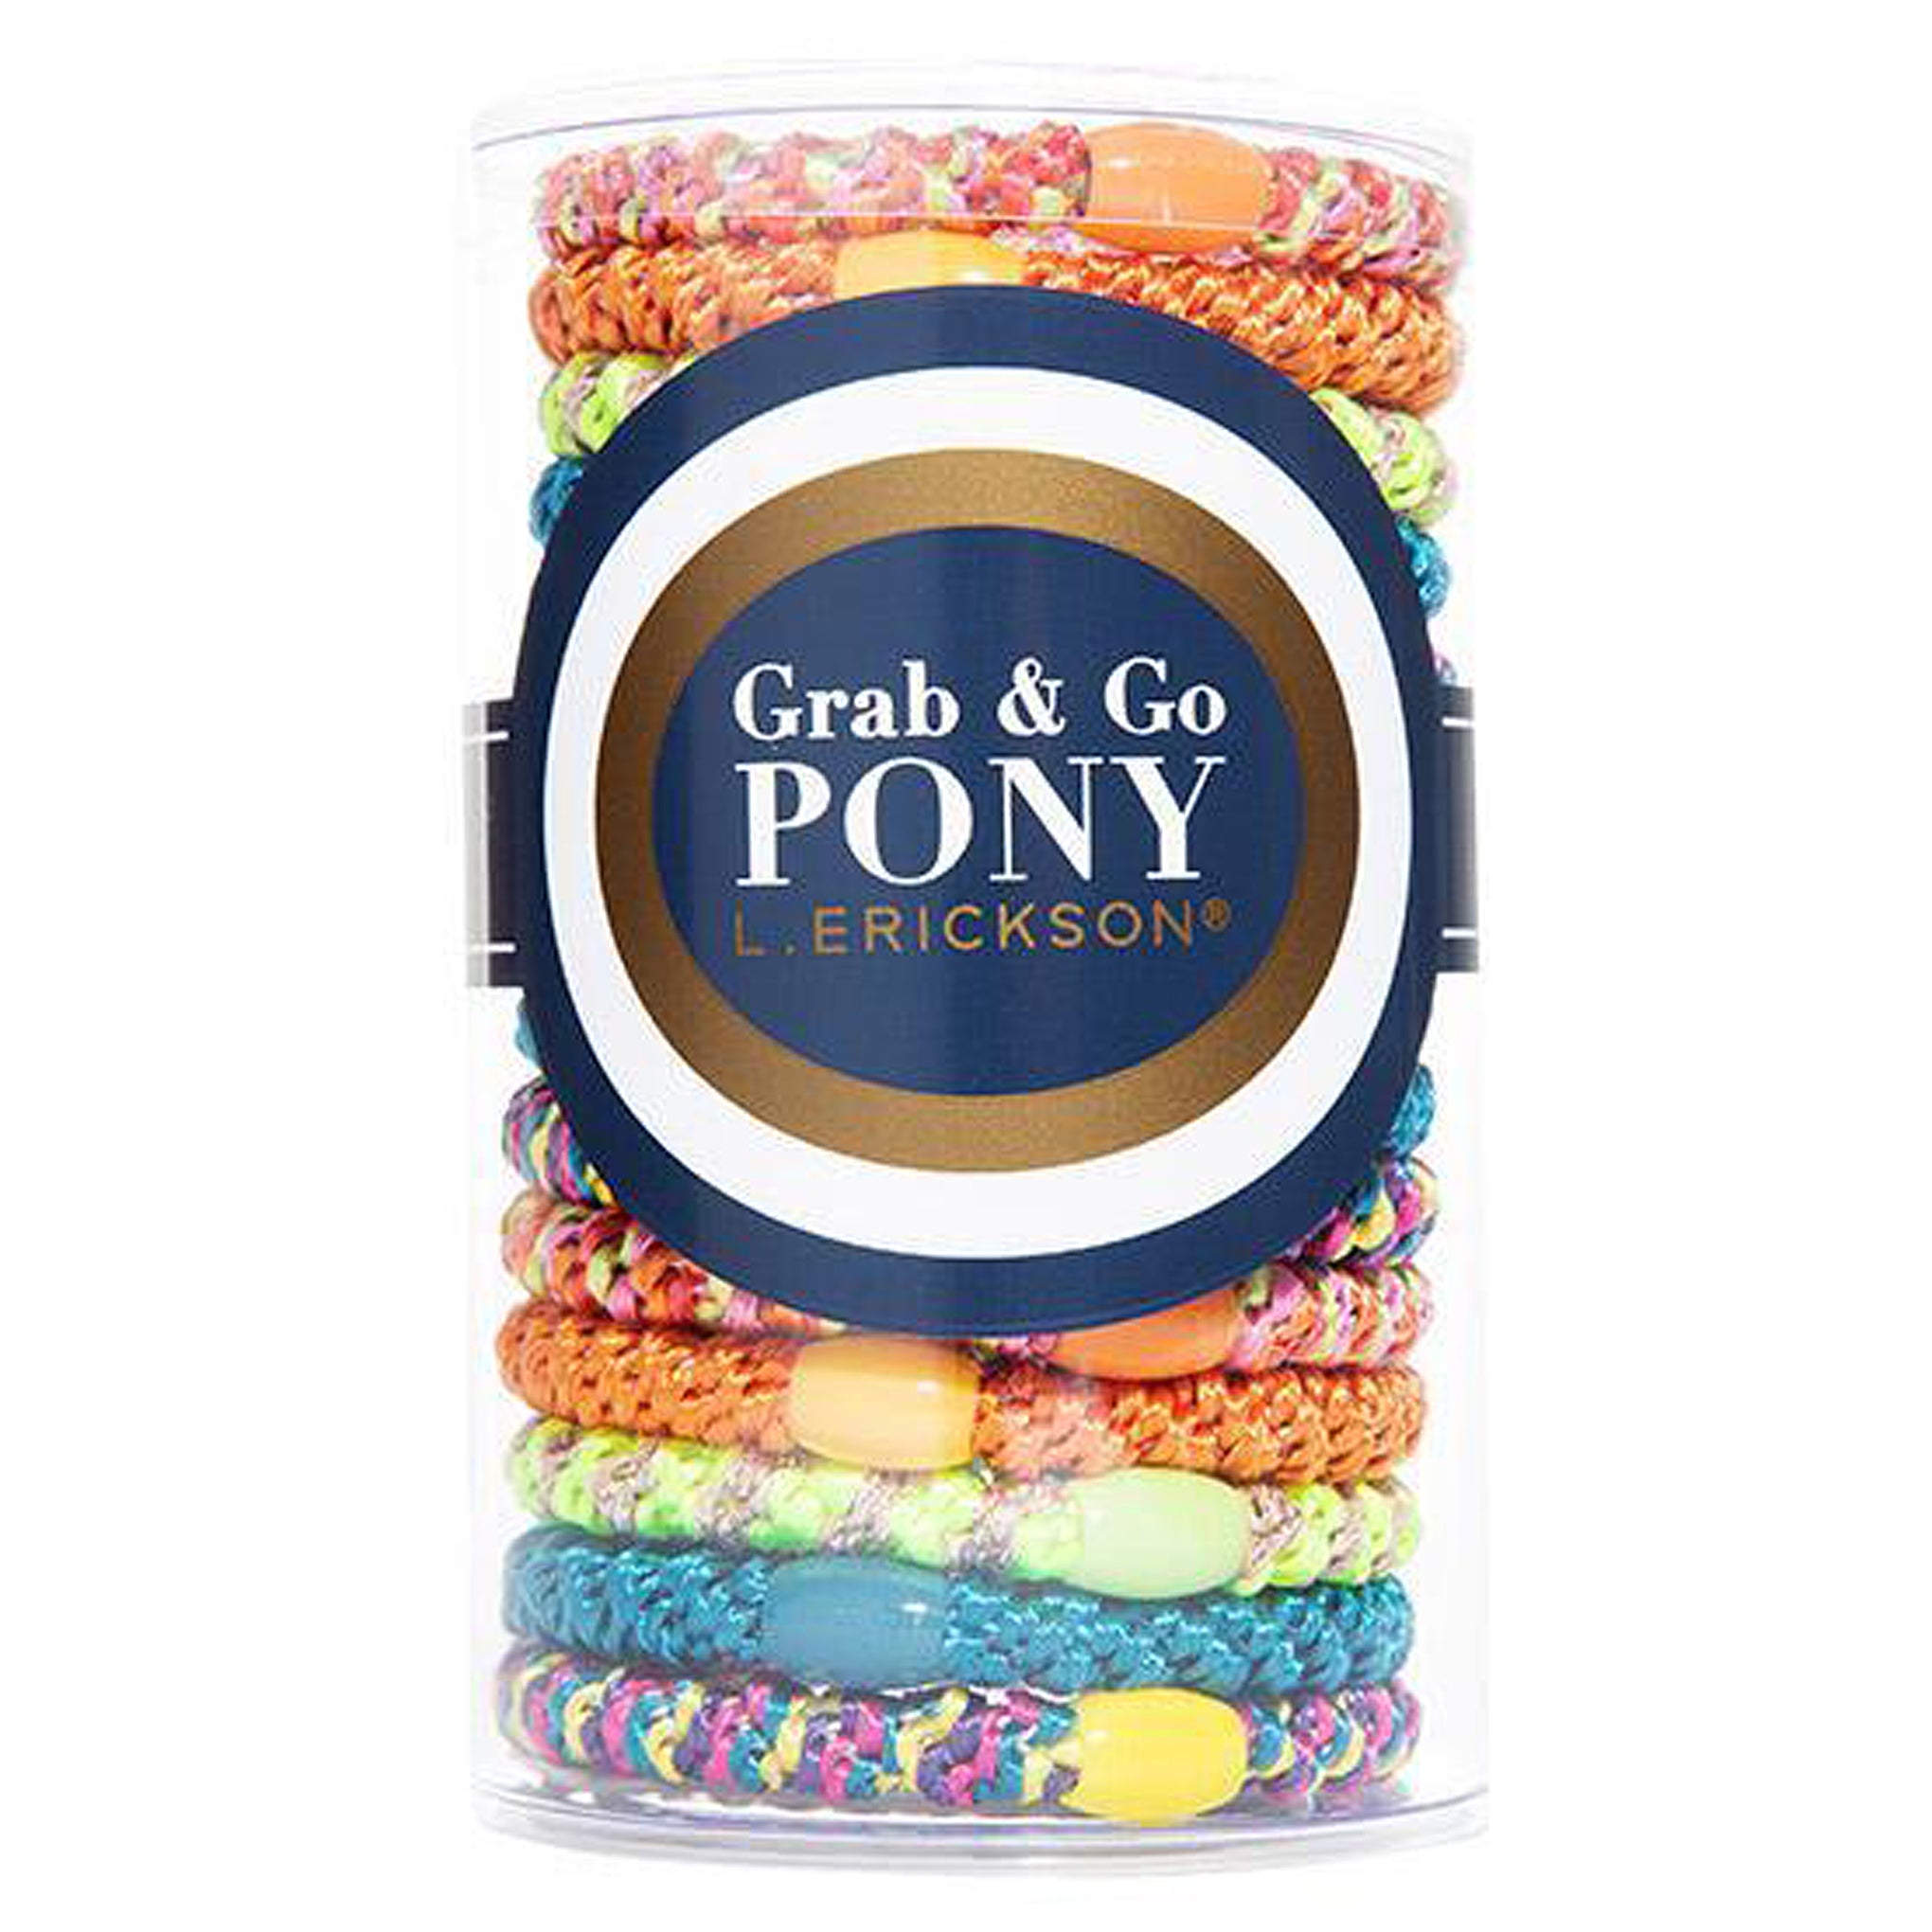 L. Erickson Grab and Go Pony Tube Hair Ties in Monkey Business 15 Pack